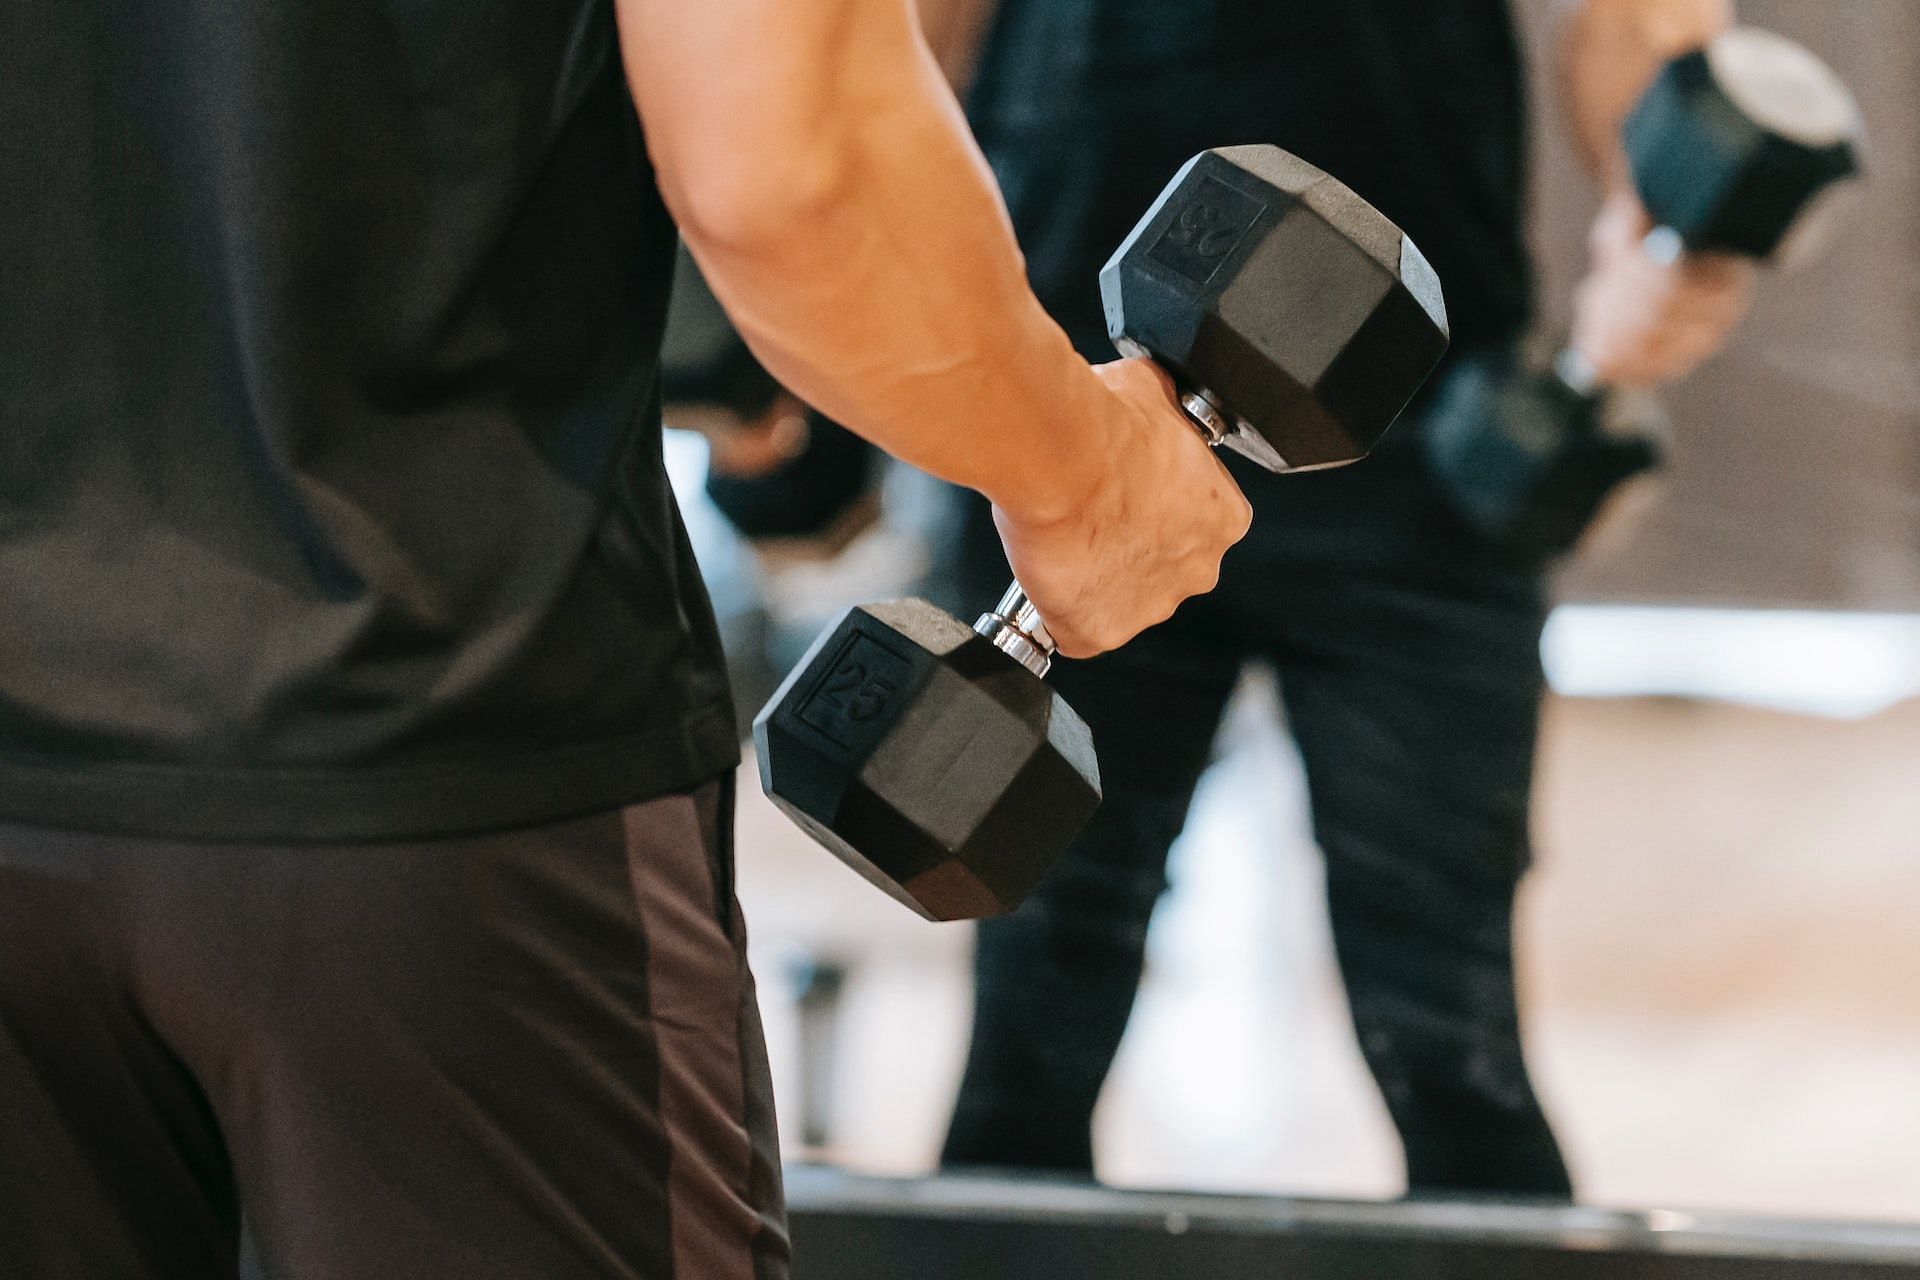 Dumbbell good morning is a great lower back strengthening exercise. (Photo via Pexels/Andres Ayrton)